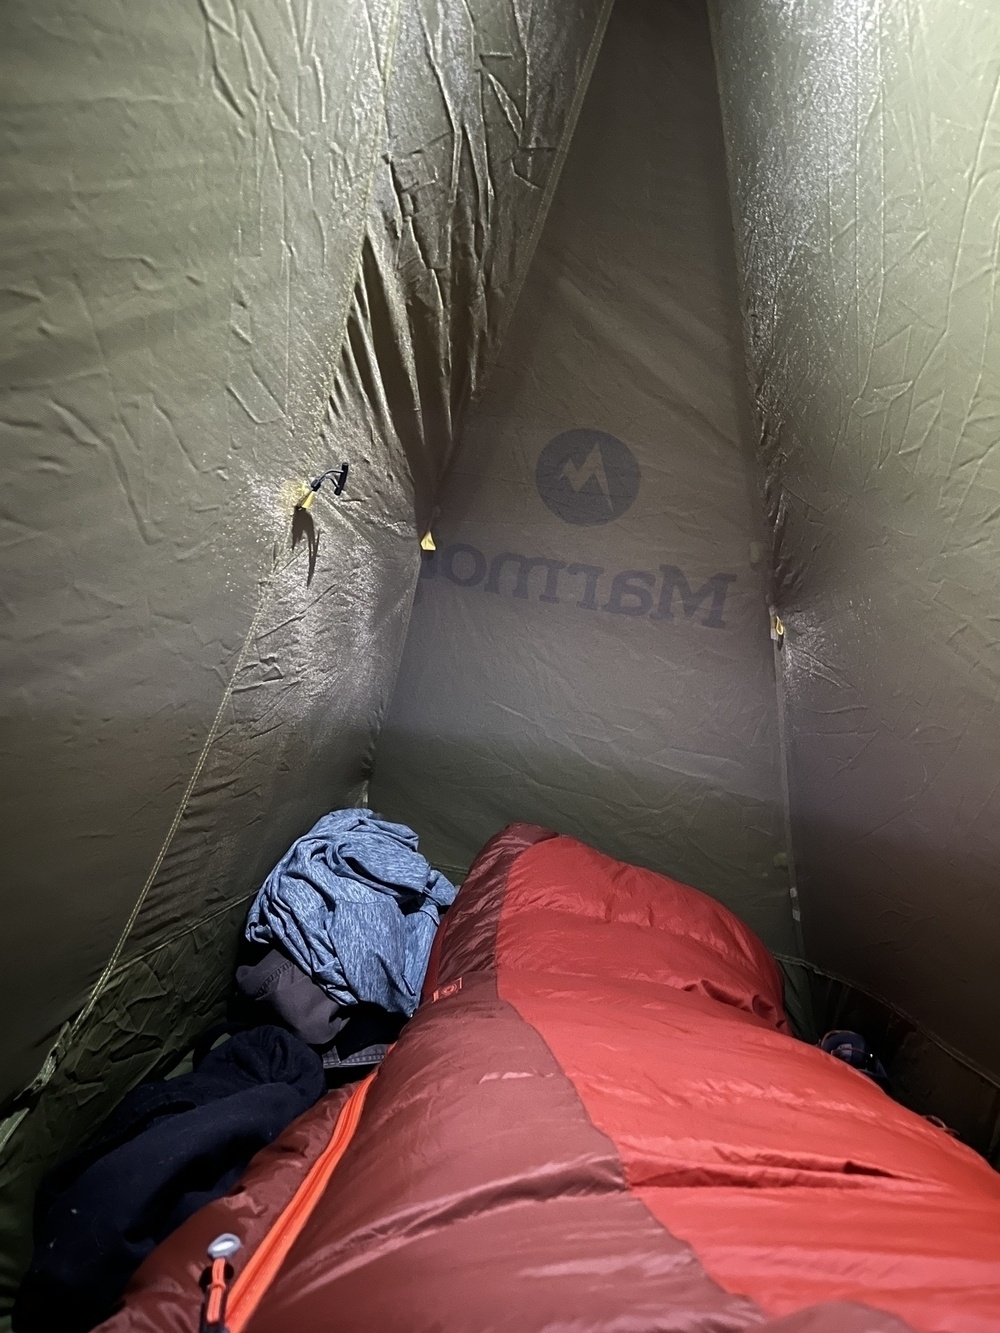 Inside a tent, a person views their sleeping space with a red sleeping bag, clothing, and the tent&rsquo;s fabric inner walls featuring a logo shadow.